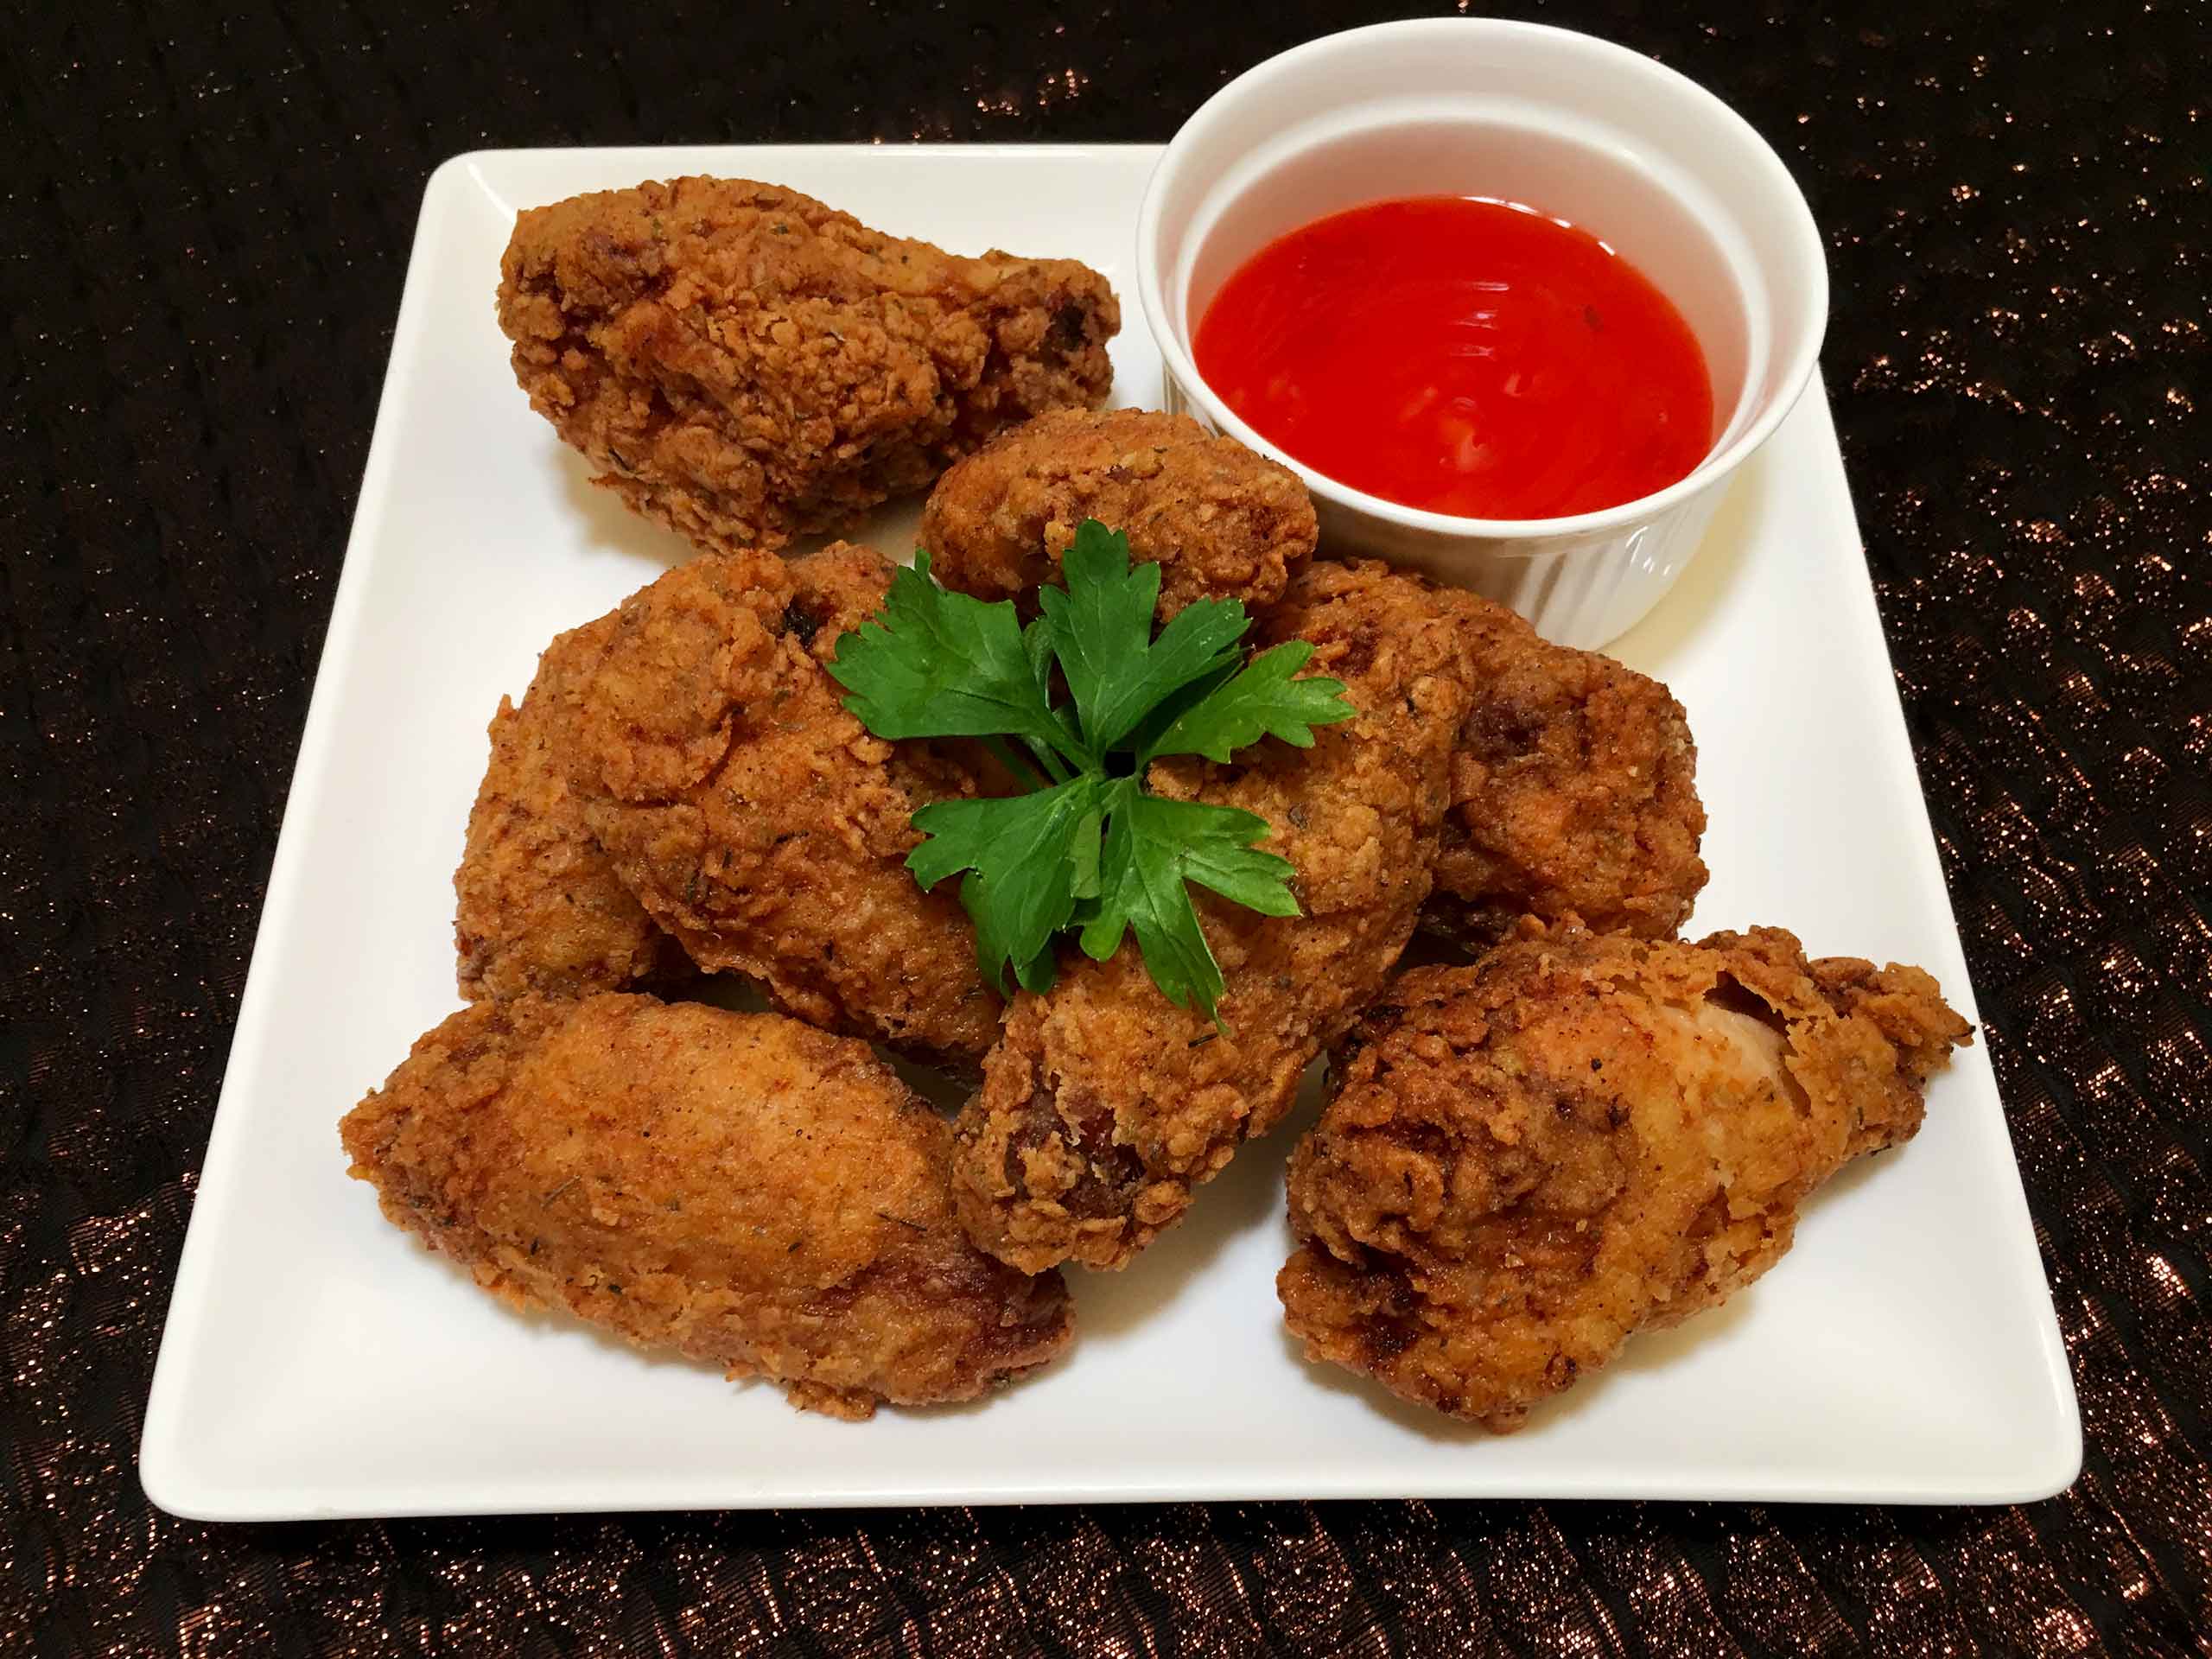 Gluten Free Fried Chicken Kfc Style Great Gluten Free Recipes For Every Occasion